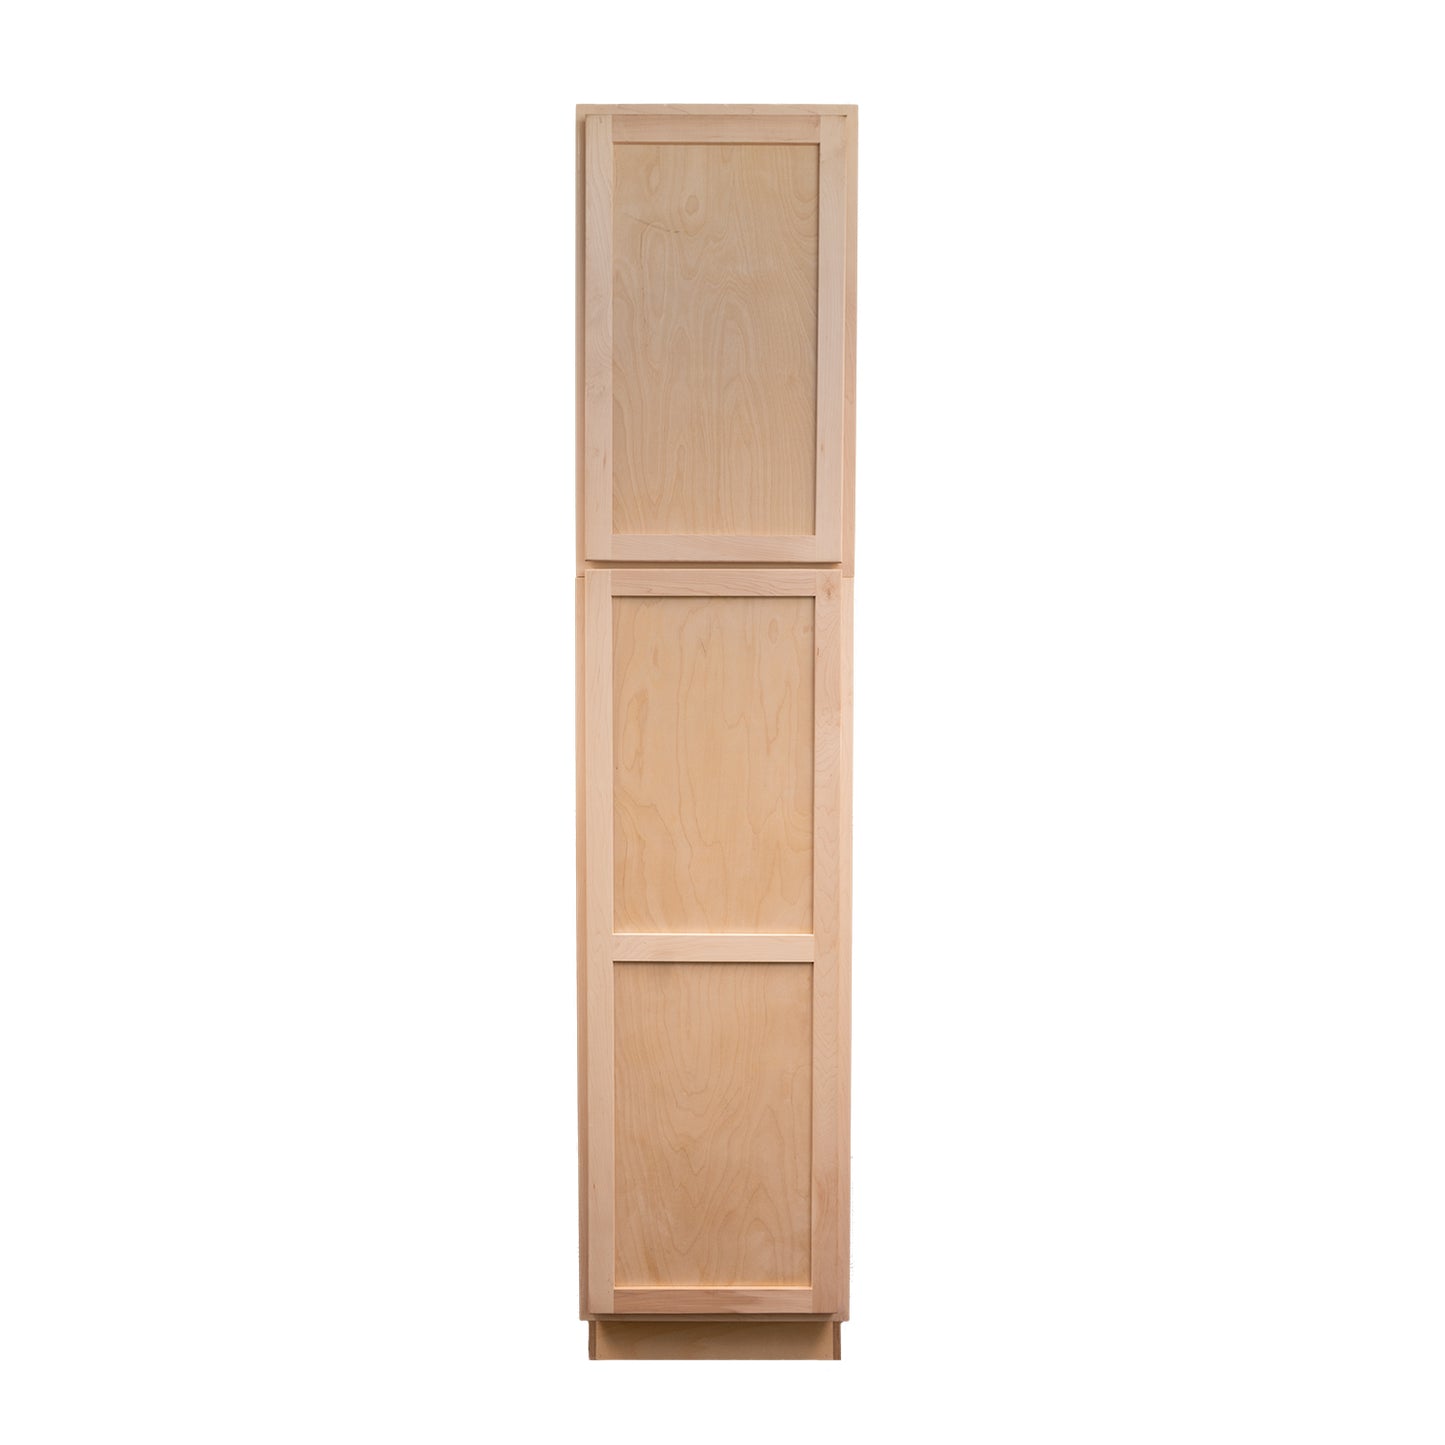 Quicklock RTA (Ready-to-Assemble) Raw Maple Pantry Cabinet 18"Wx84"Hx24"D